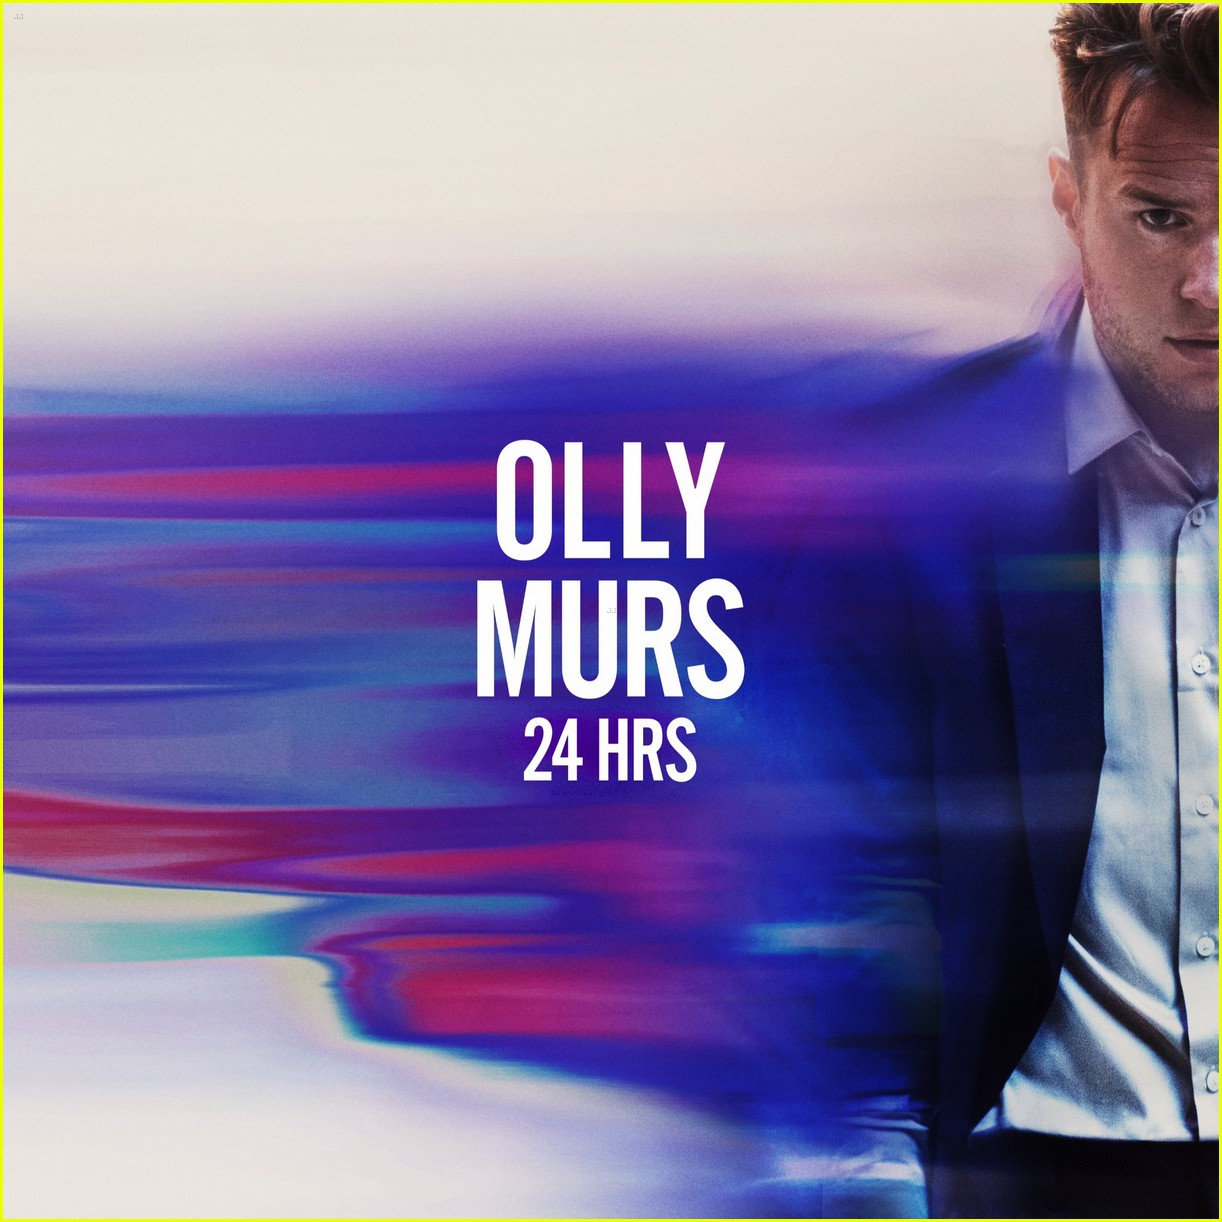 olly murs grow up video with kids track list album cover 03